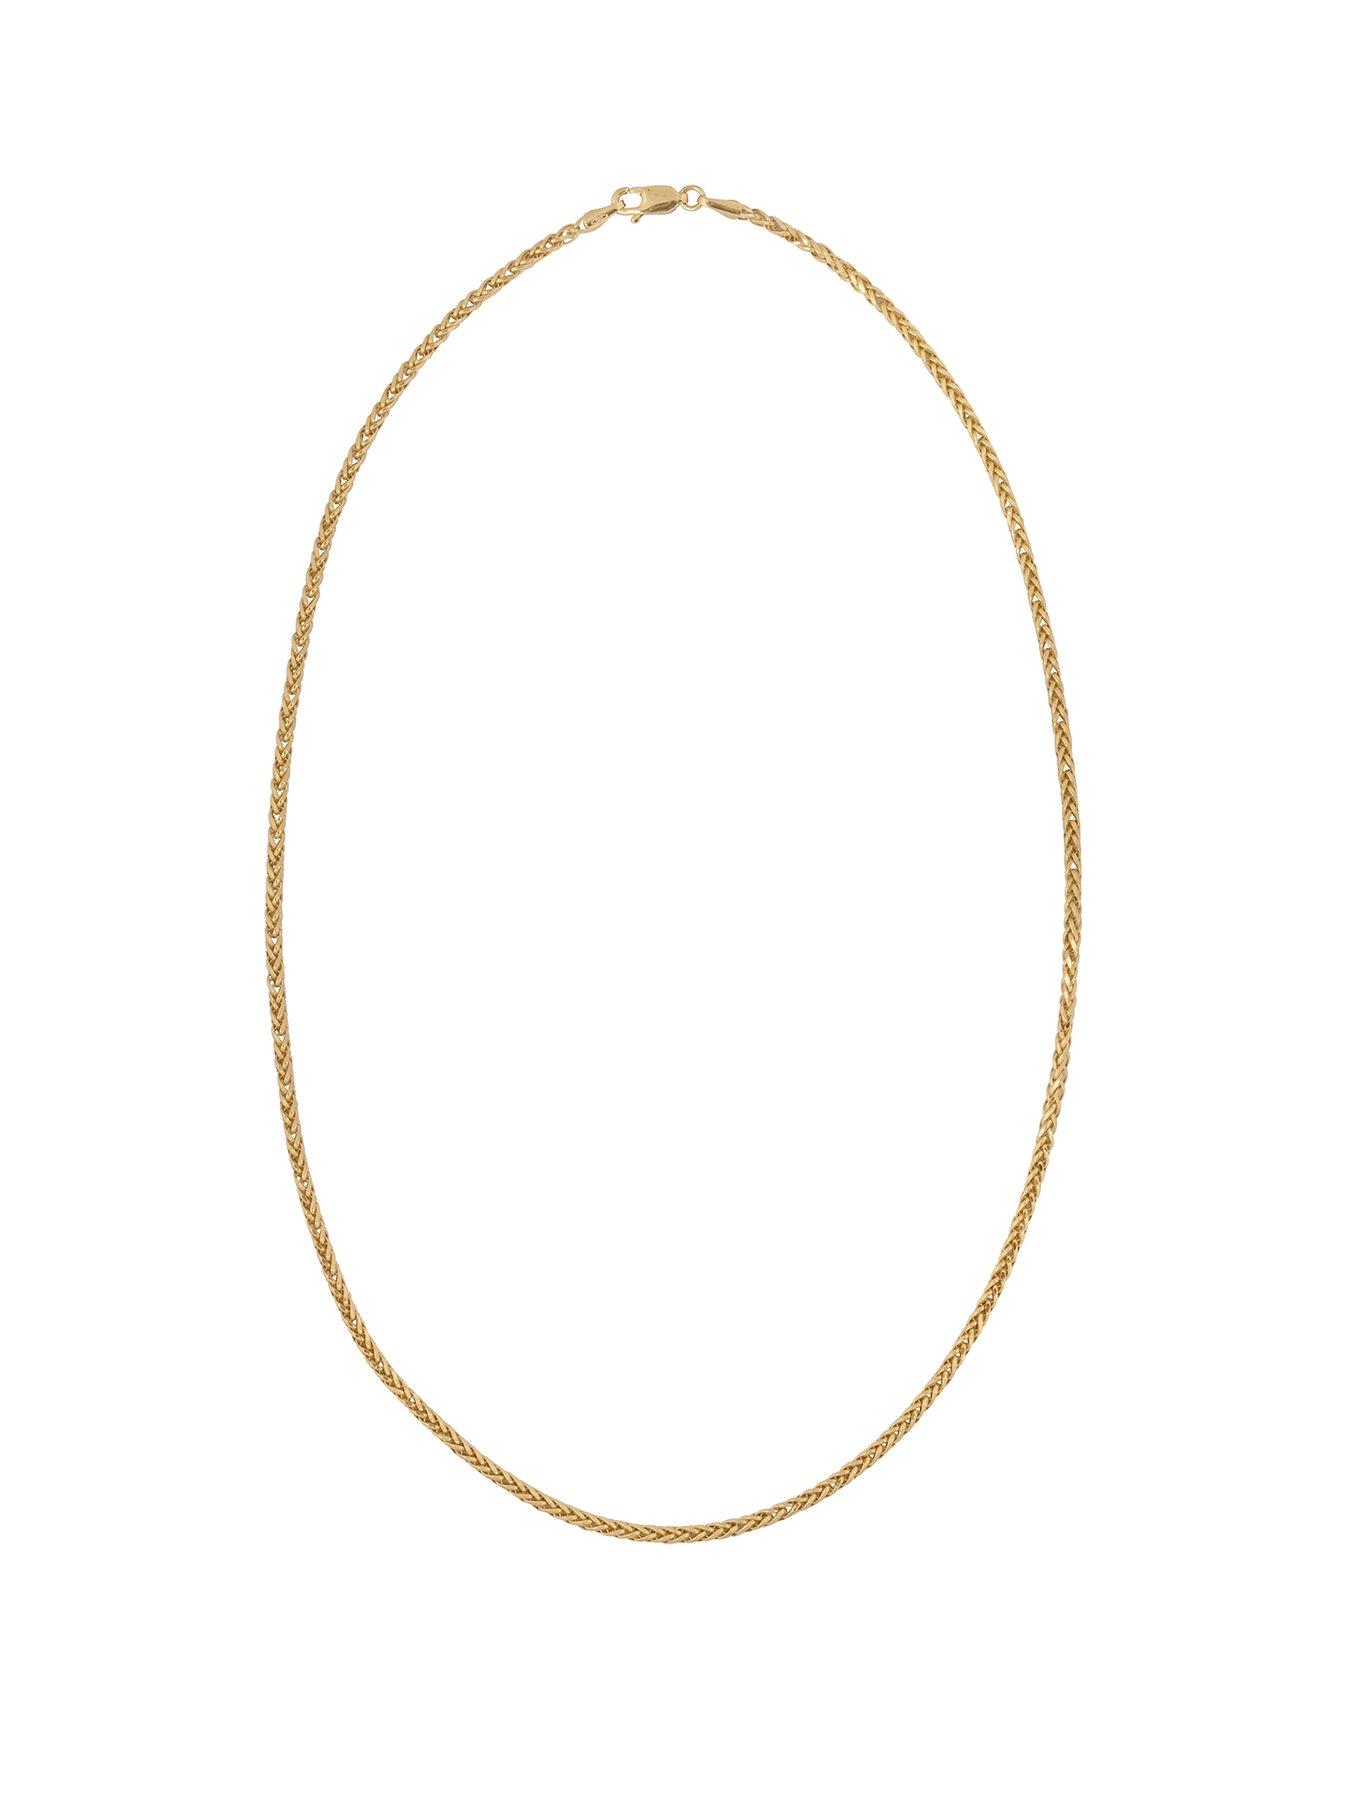  9ct Gold 18 inch Spiga chain necklace